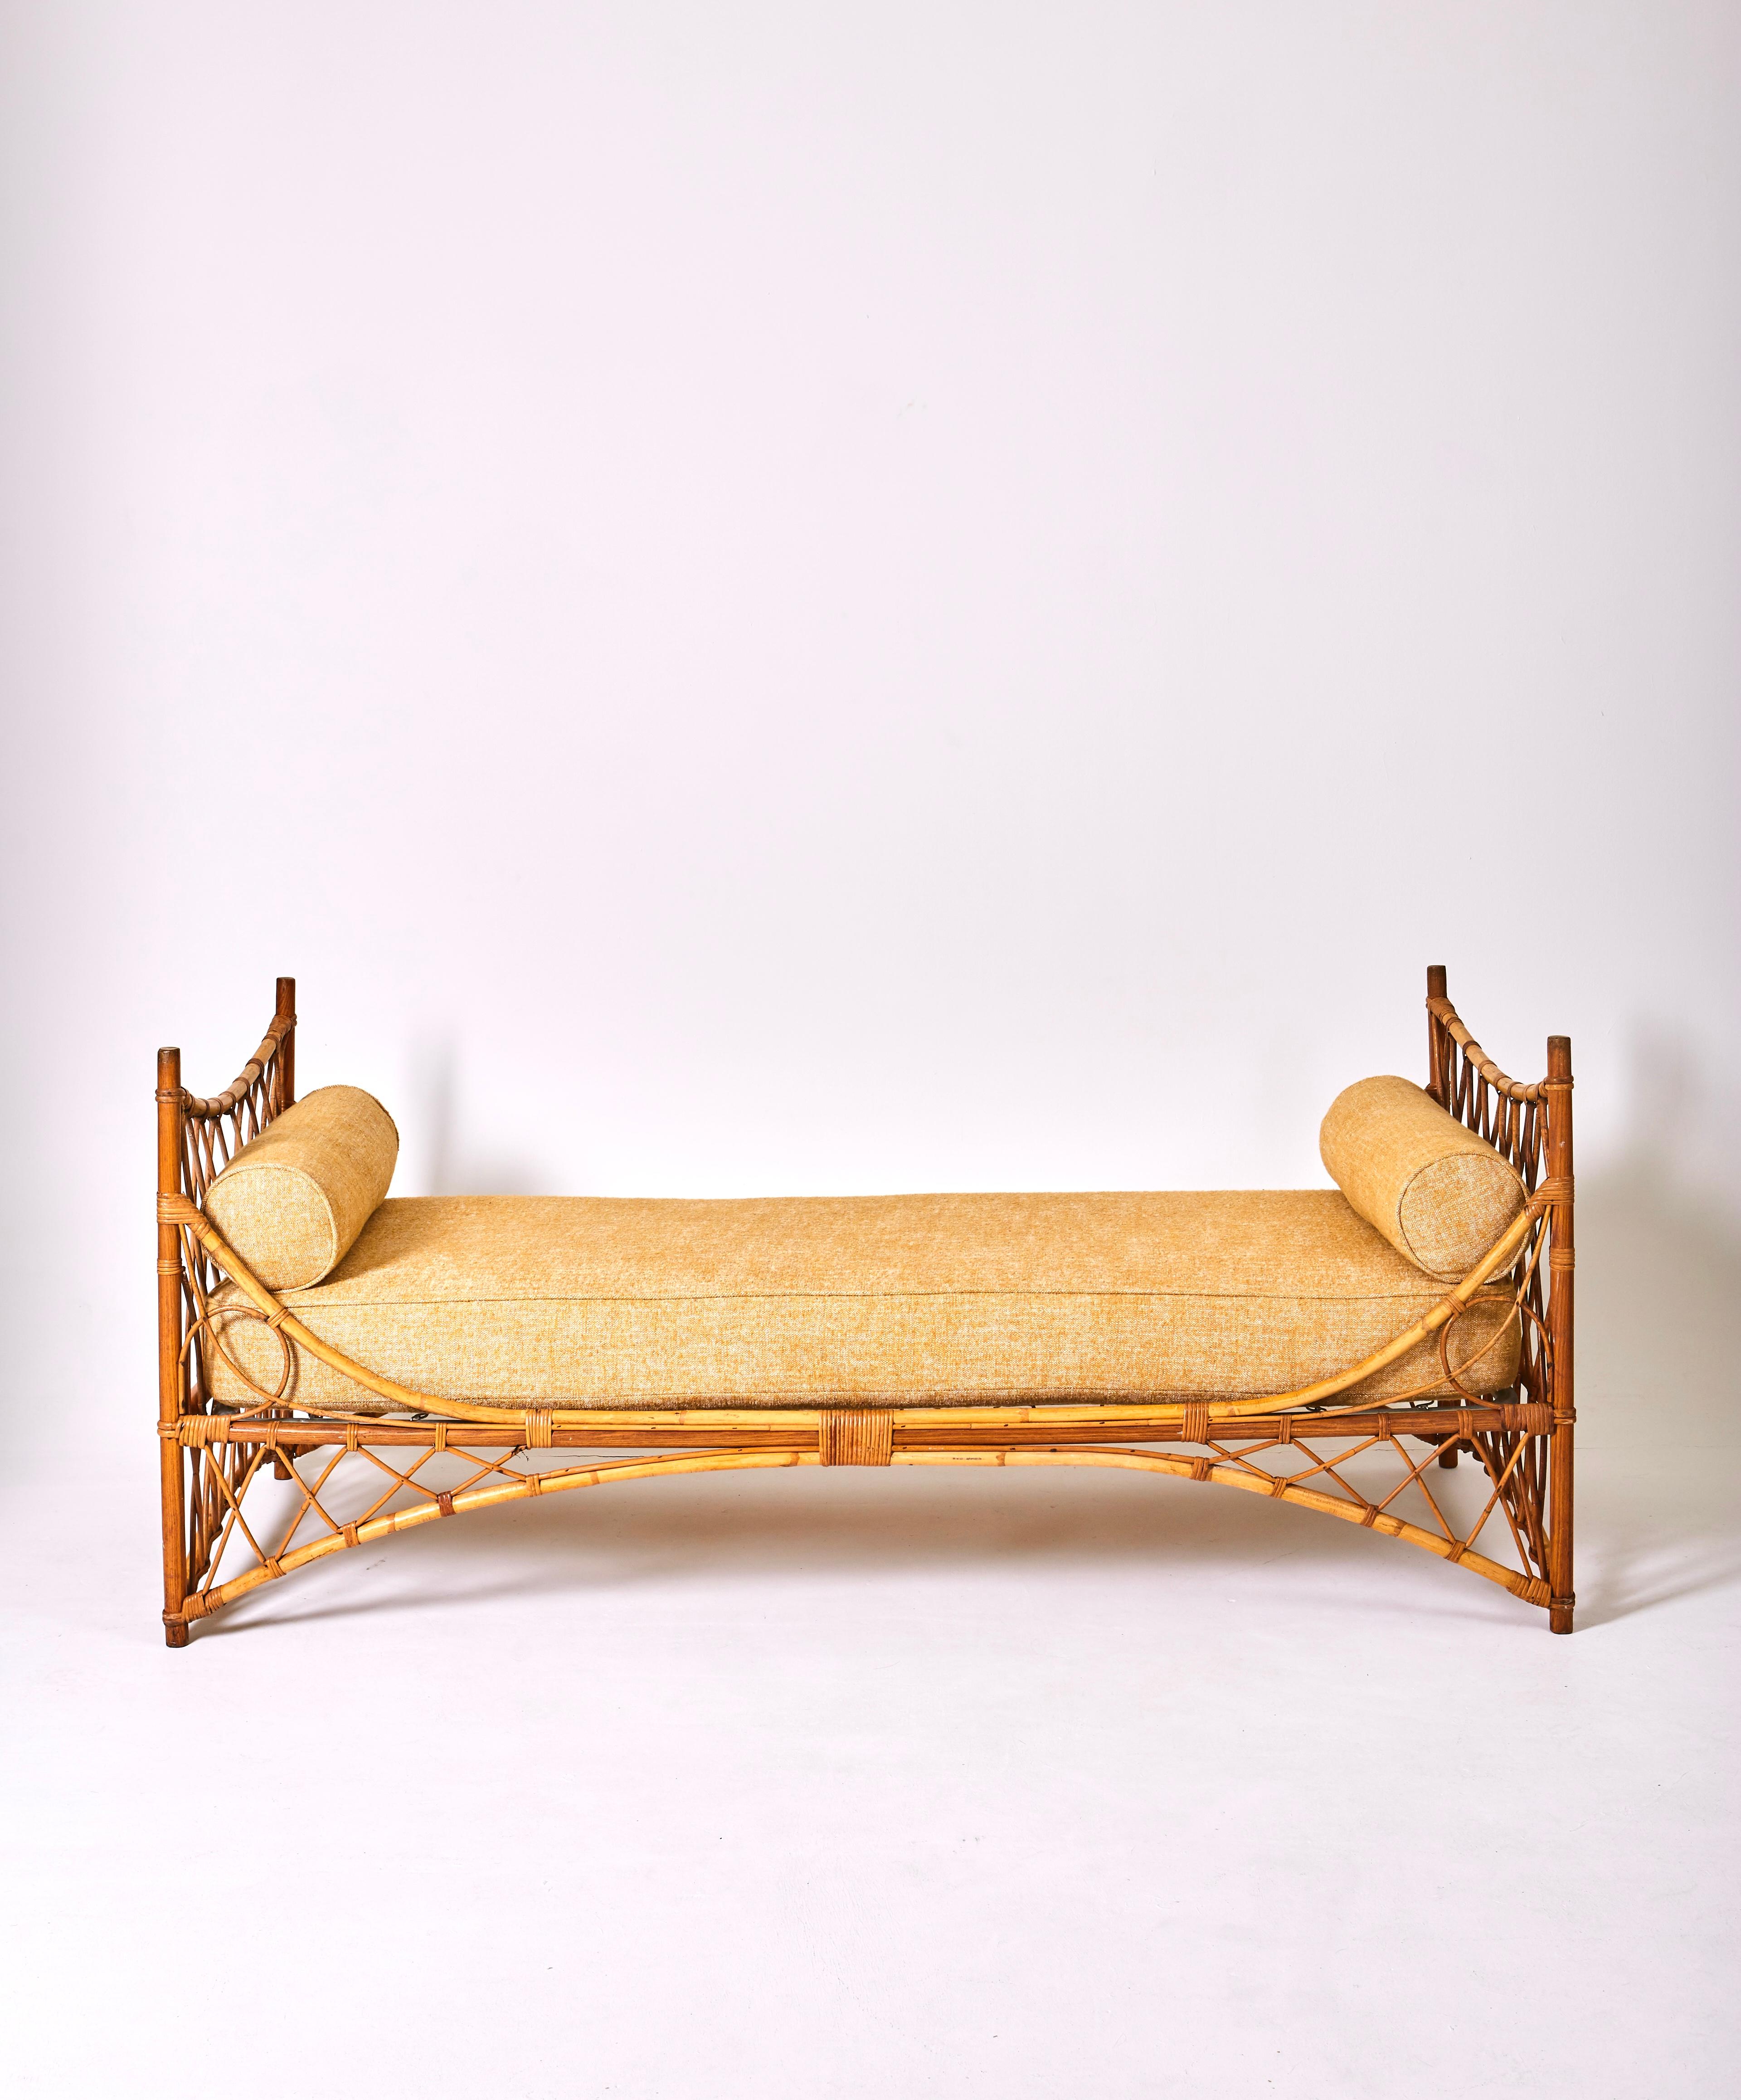 Bench or bed of rest in rattan. French work from the 1960s. Entirely reupholstered in high quality fabric Pierre Frey arsene honey color. Dimensions h93 X l195x d90.